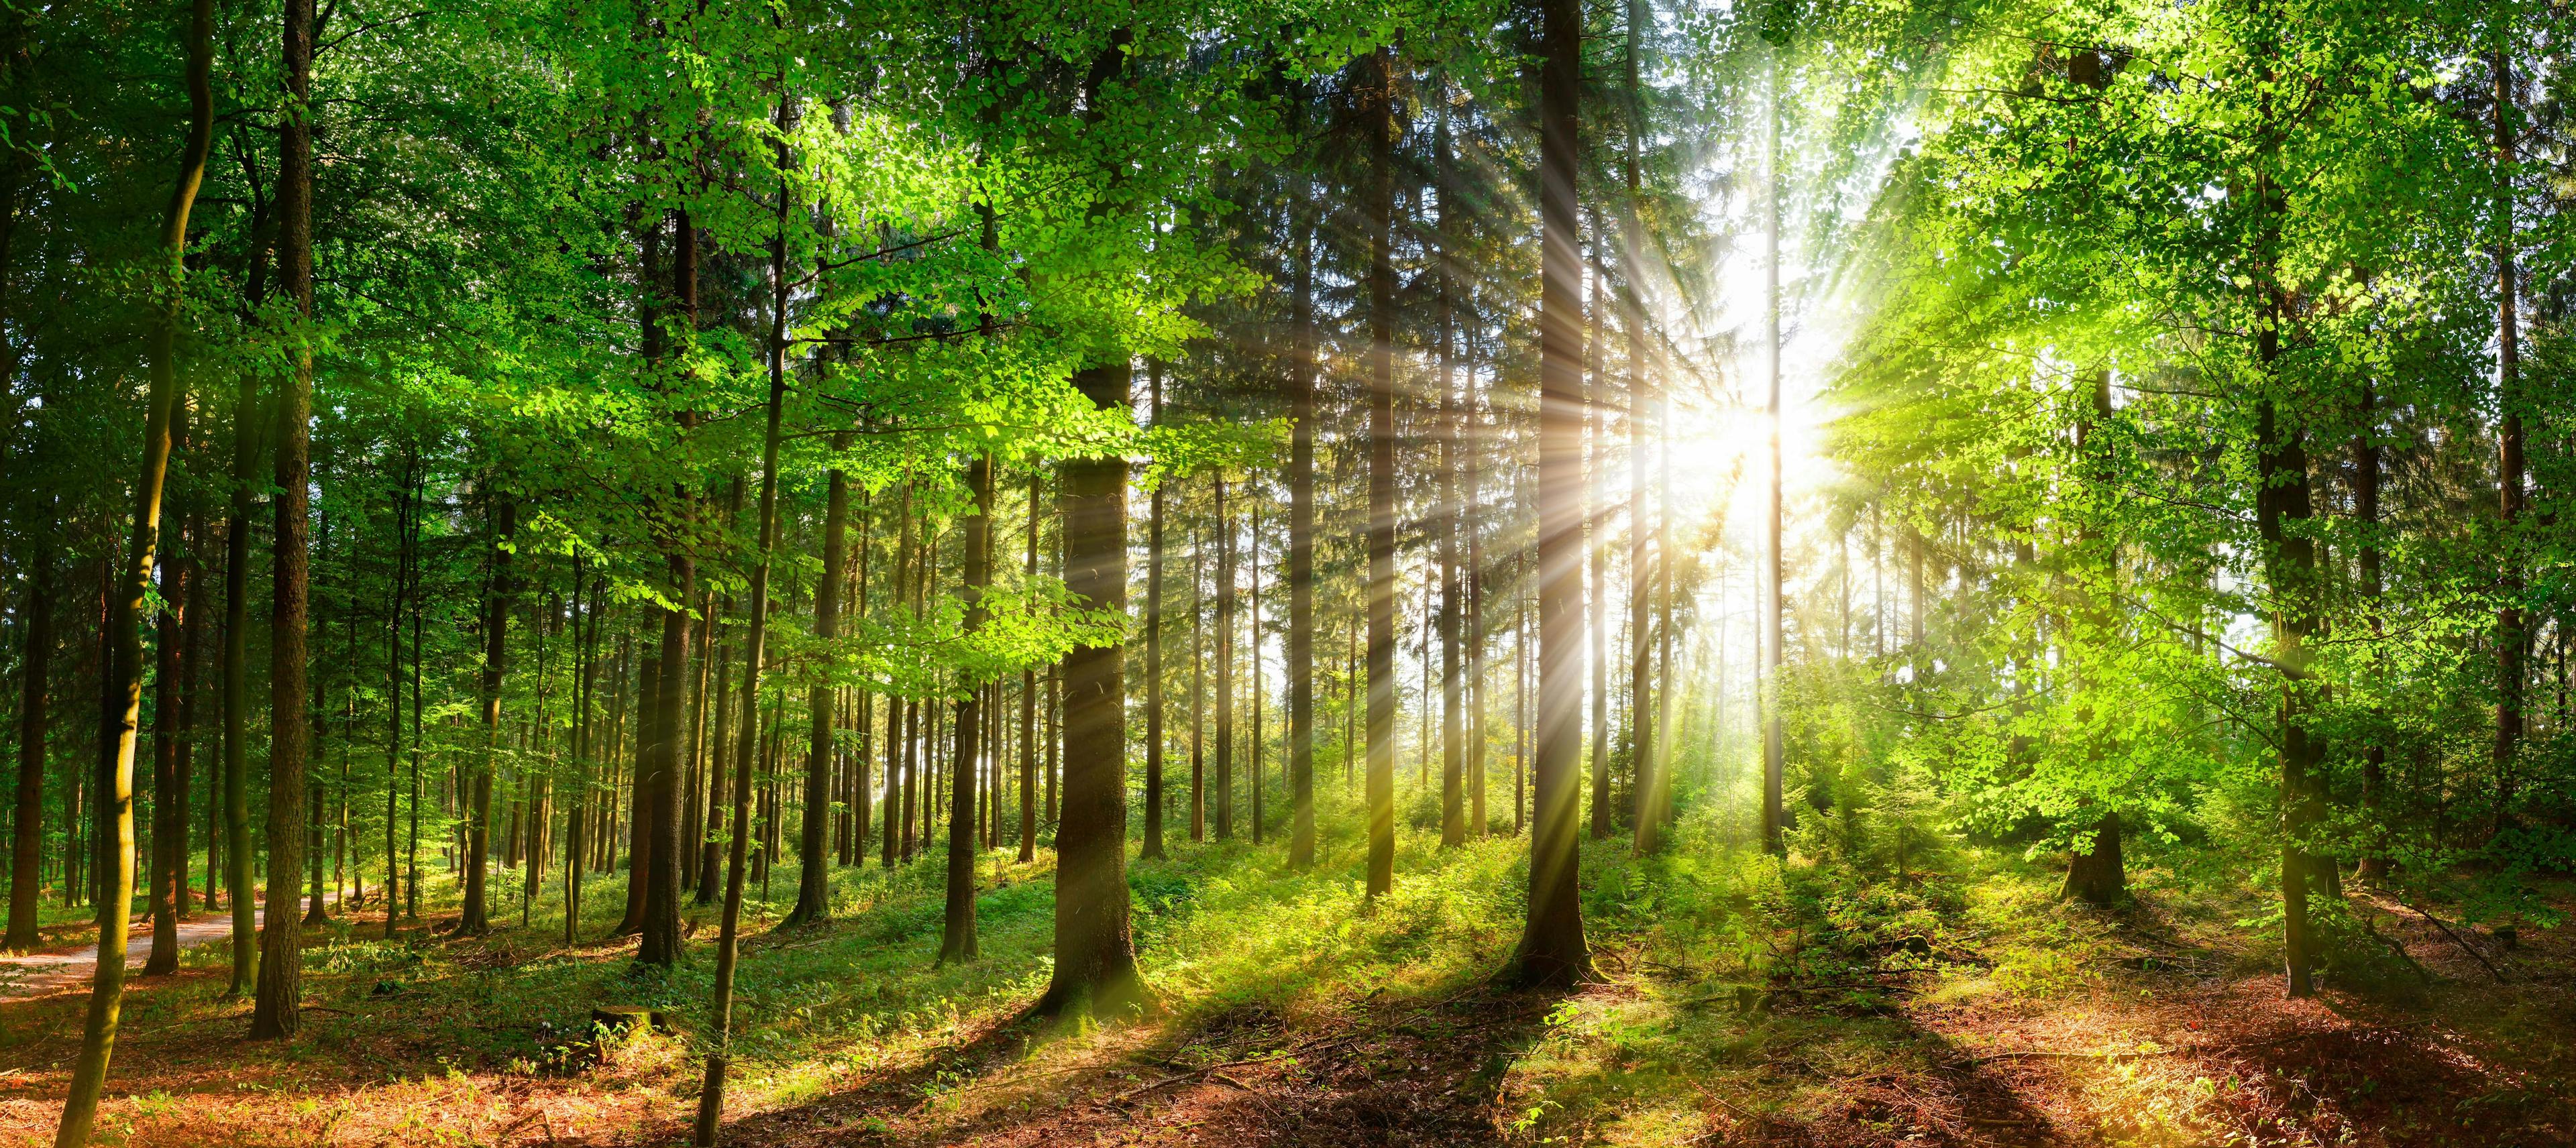 Beautiful rays of sunlight in a green forest | Image Credit: © Smileus - stock.adobe.com.